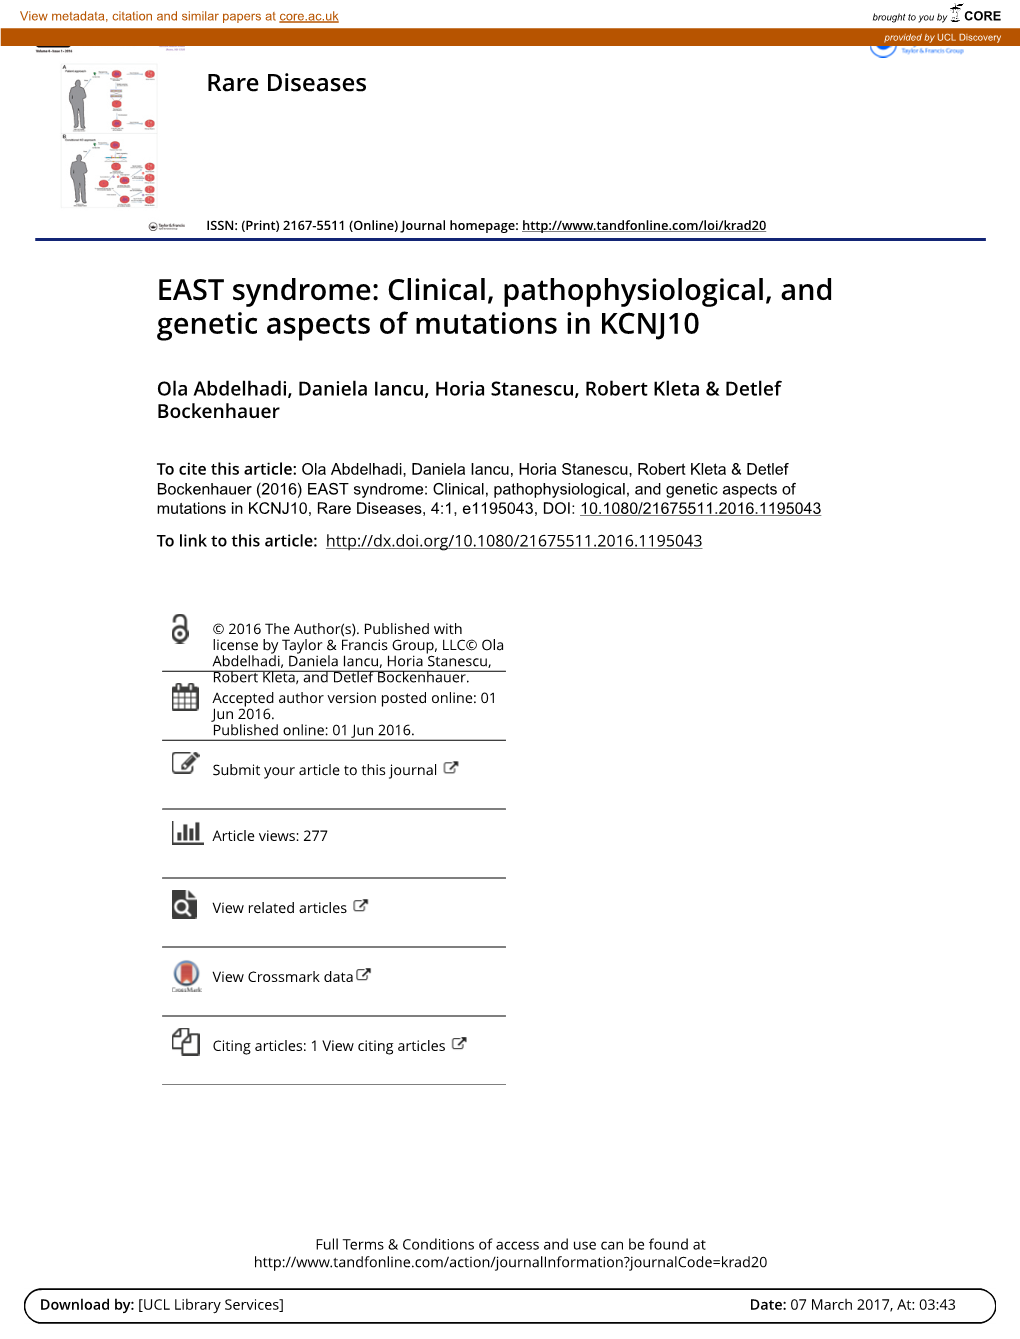 EAST Syndrome: Clinical, Pathophysiological, and Genetic Aspects of Mutations in KCNJ10